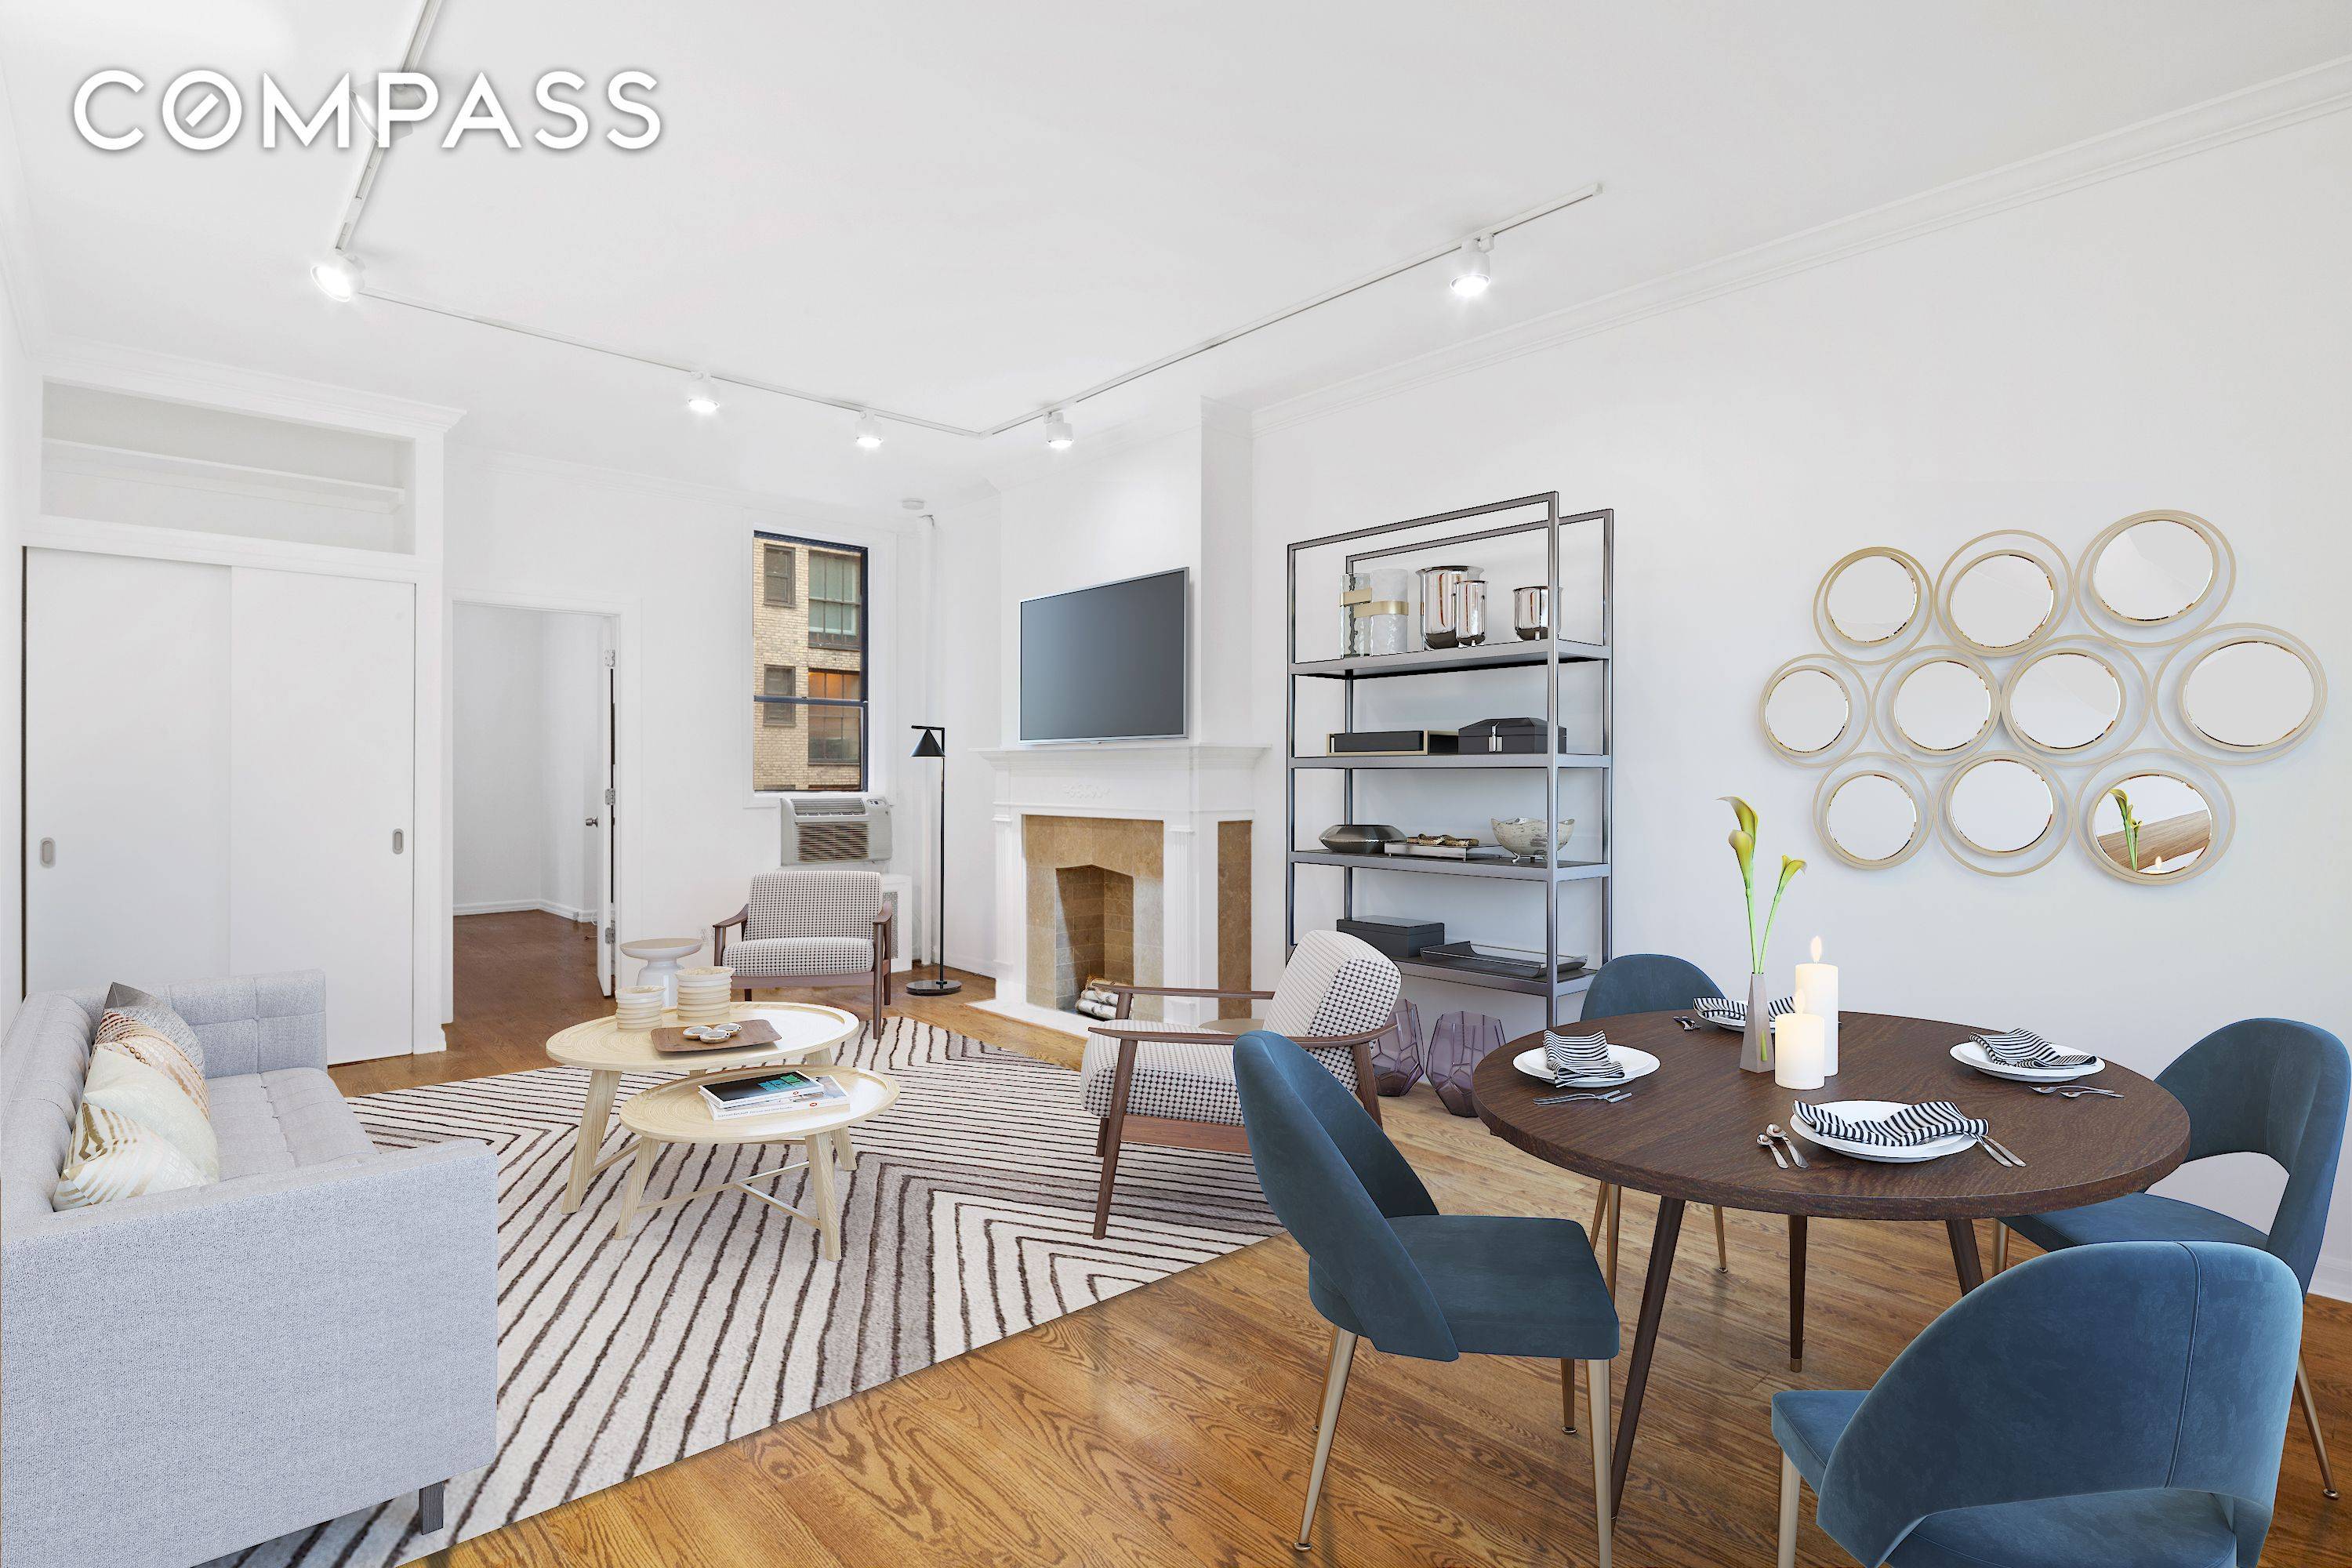 Find the warmth of a brownstone home together with the conveniences of modern living in this PRE WAR 1BR CONDO.